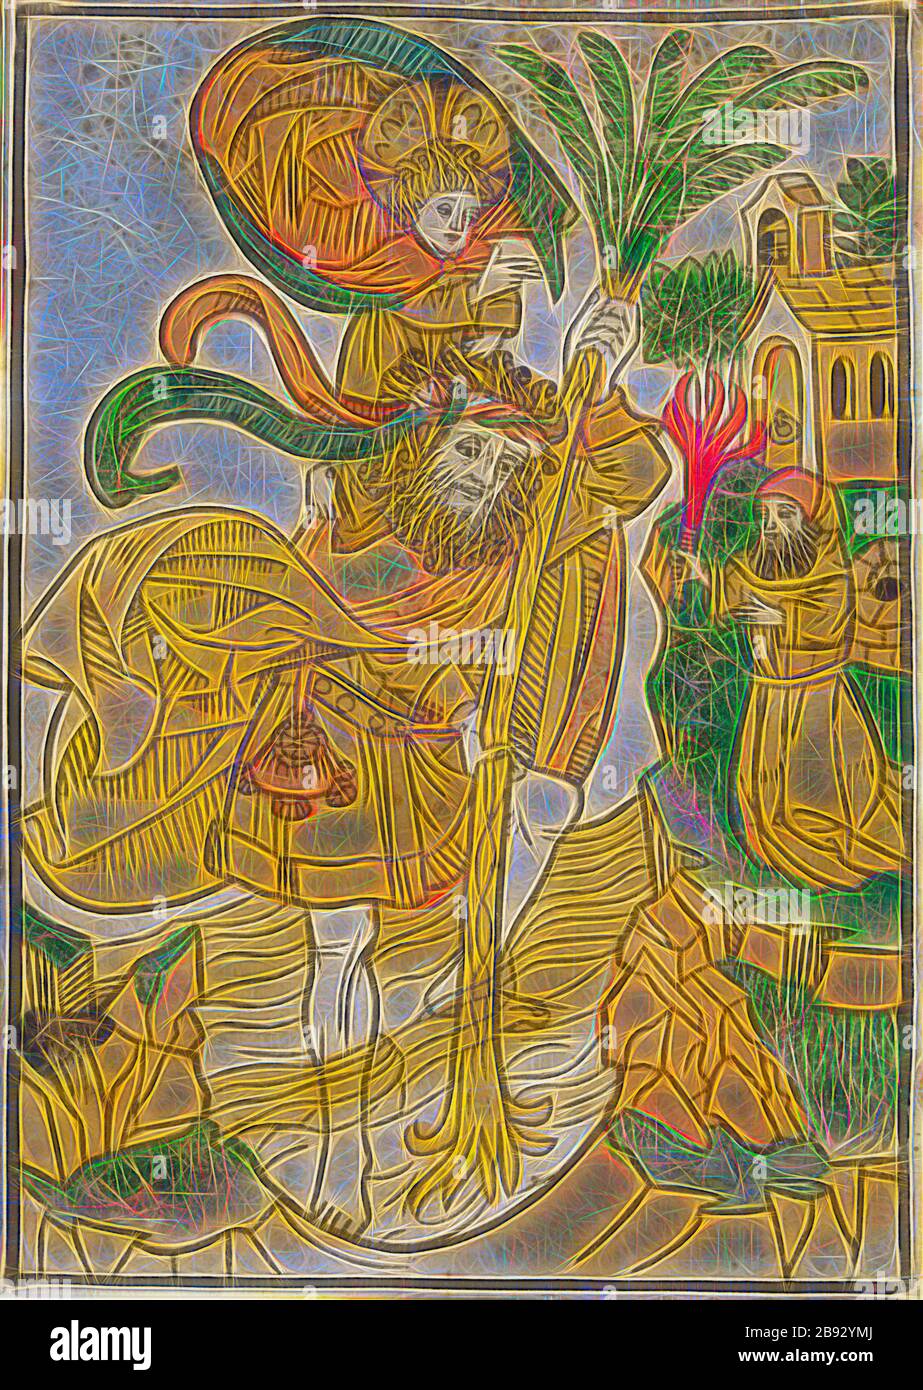 St. Christopher, c. 1480, woodcut, colored (unique), unique, folia: 19 x 13.6 cm, Anonym, Oberrhein, 15. Jh., Reimagined by Gibon, design of warm cheerful glowing of brightness and light rays radiance. Classic art reinvented with a modern twist. Photography inspired by futurism, embracing dynamic energy of modern technology, movement, speed and revolutionize culture. Stock Photo